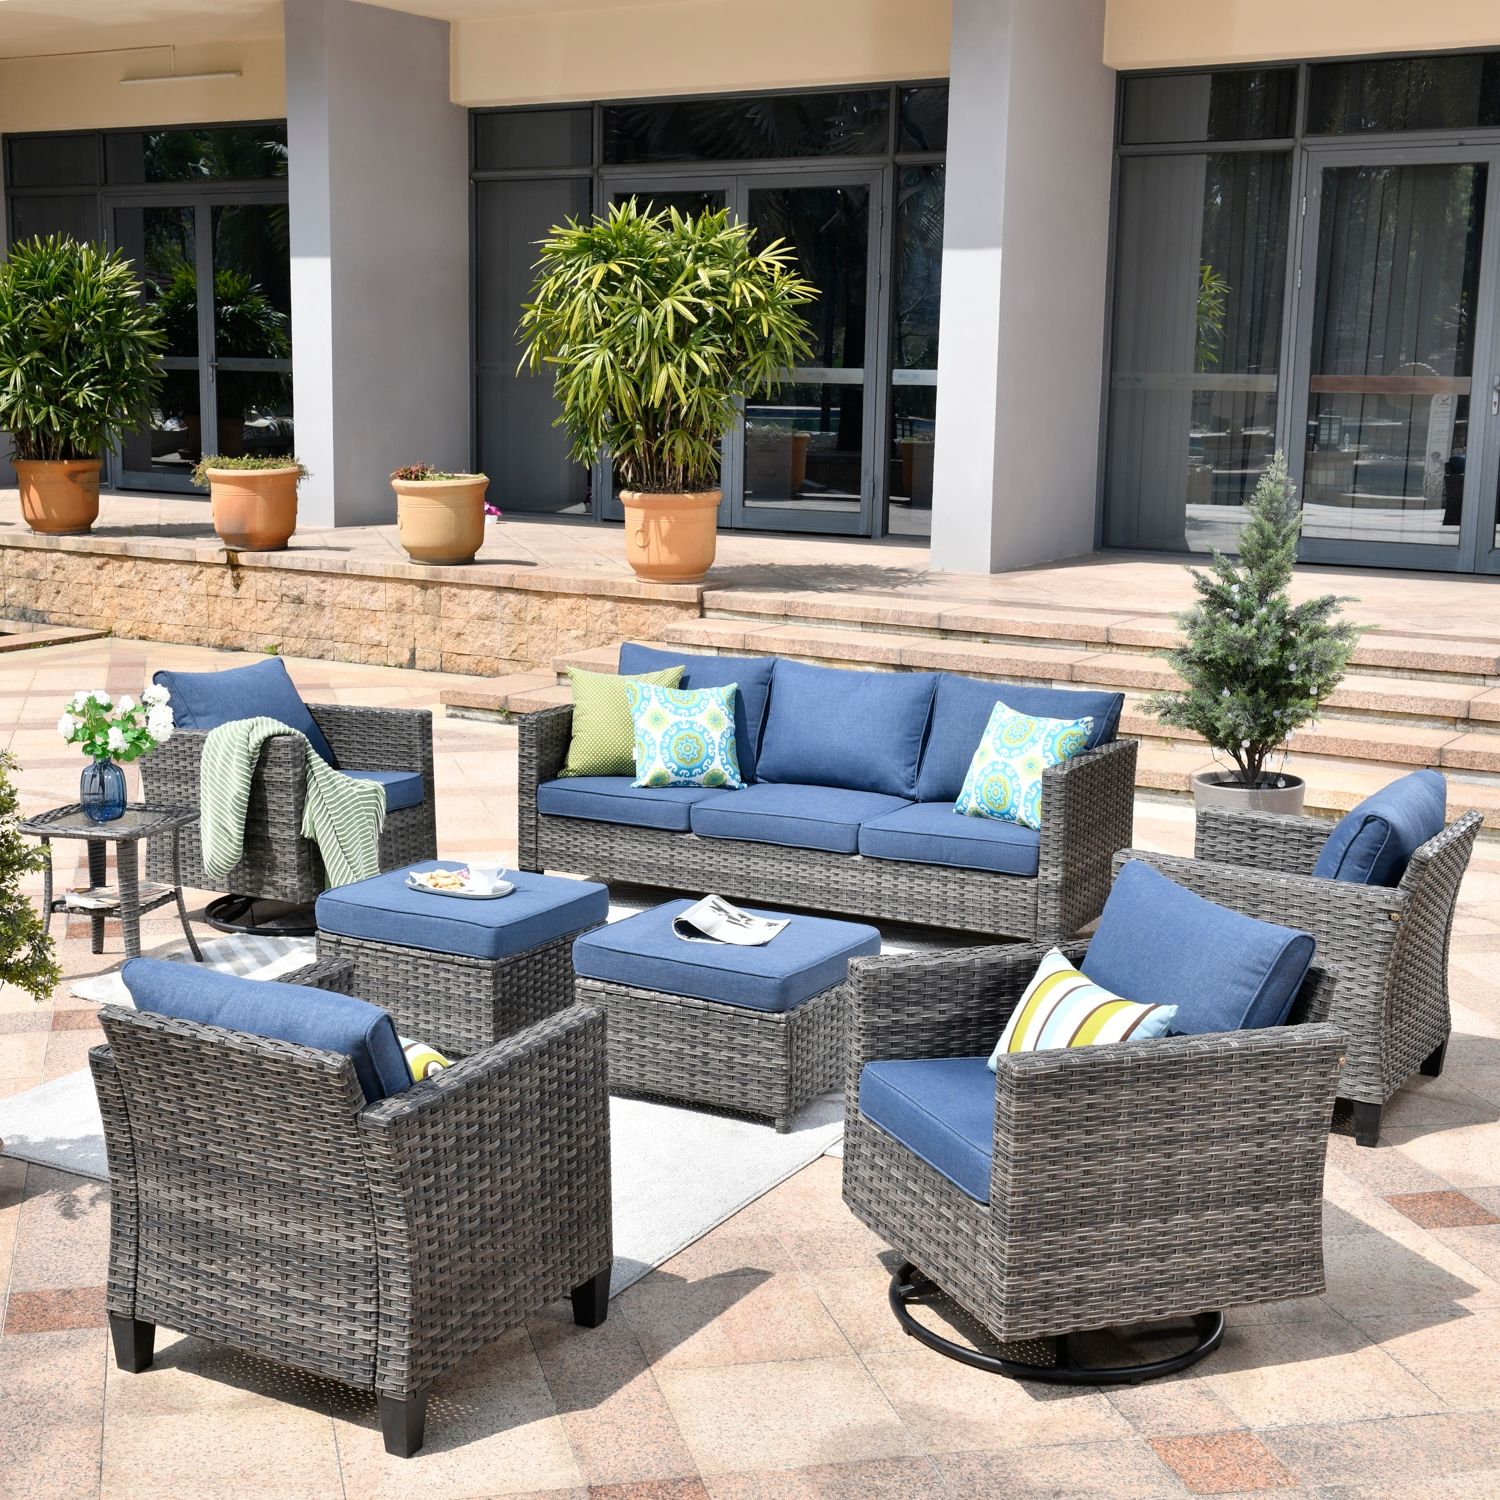 Xizzi Lullaby 8 Piece Rattan Patio Conversation Set With Blue Cushions In  The Patio Conversation Sets Department At Lowes For Best And Newest 8 Pcs Outdoor Patio Furniture Set (View 7 of 15)